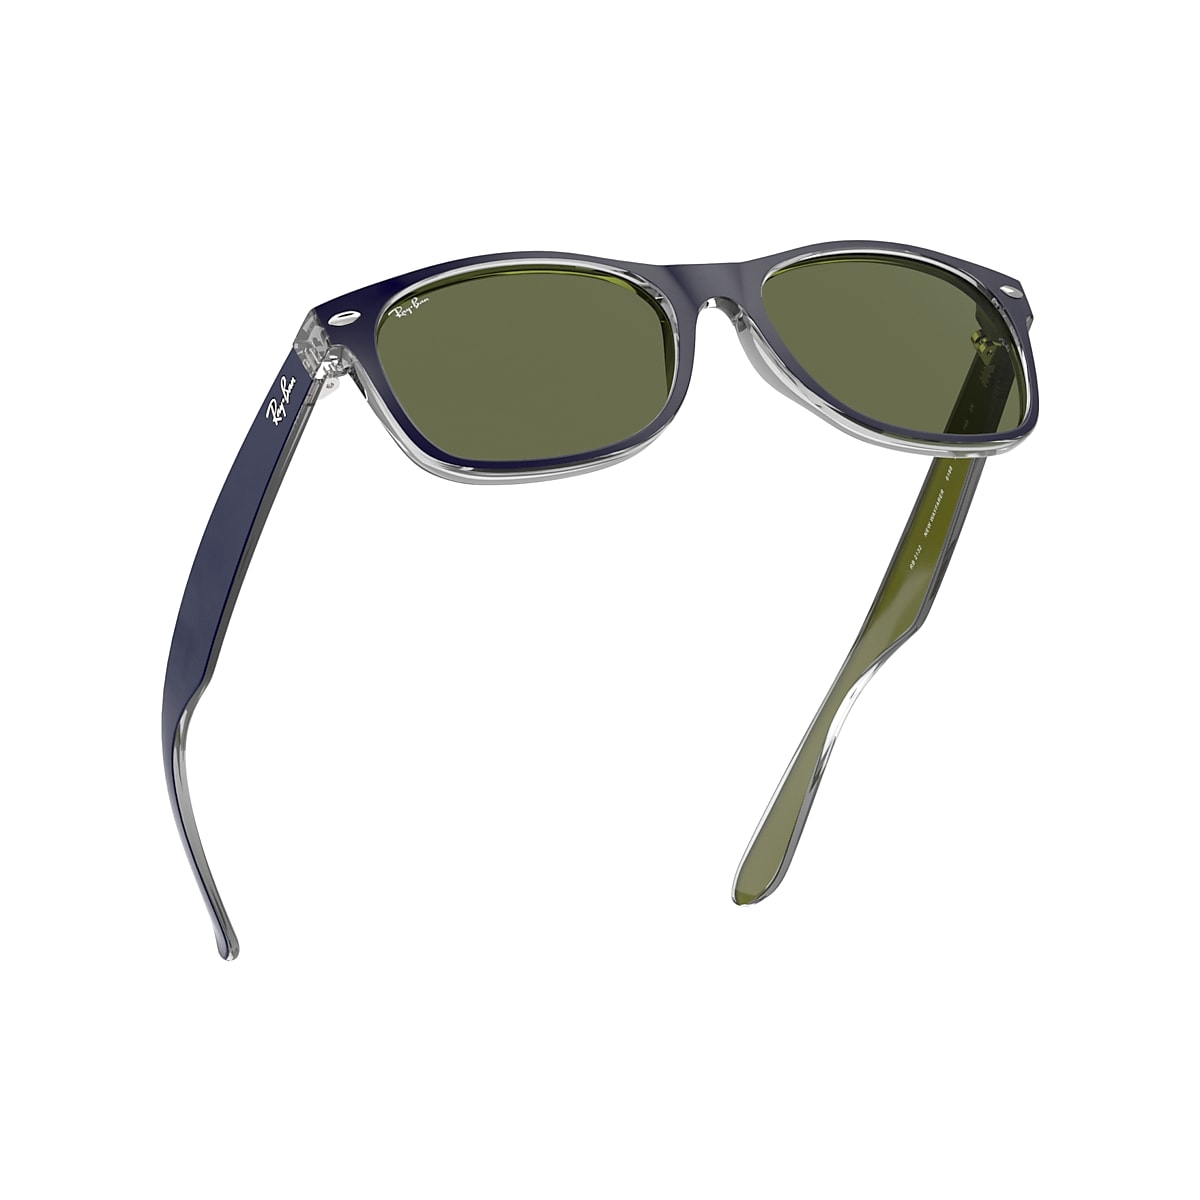 New Wayfarer Bicolor Sunglasses in Blue and Green | Ray-Ban®